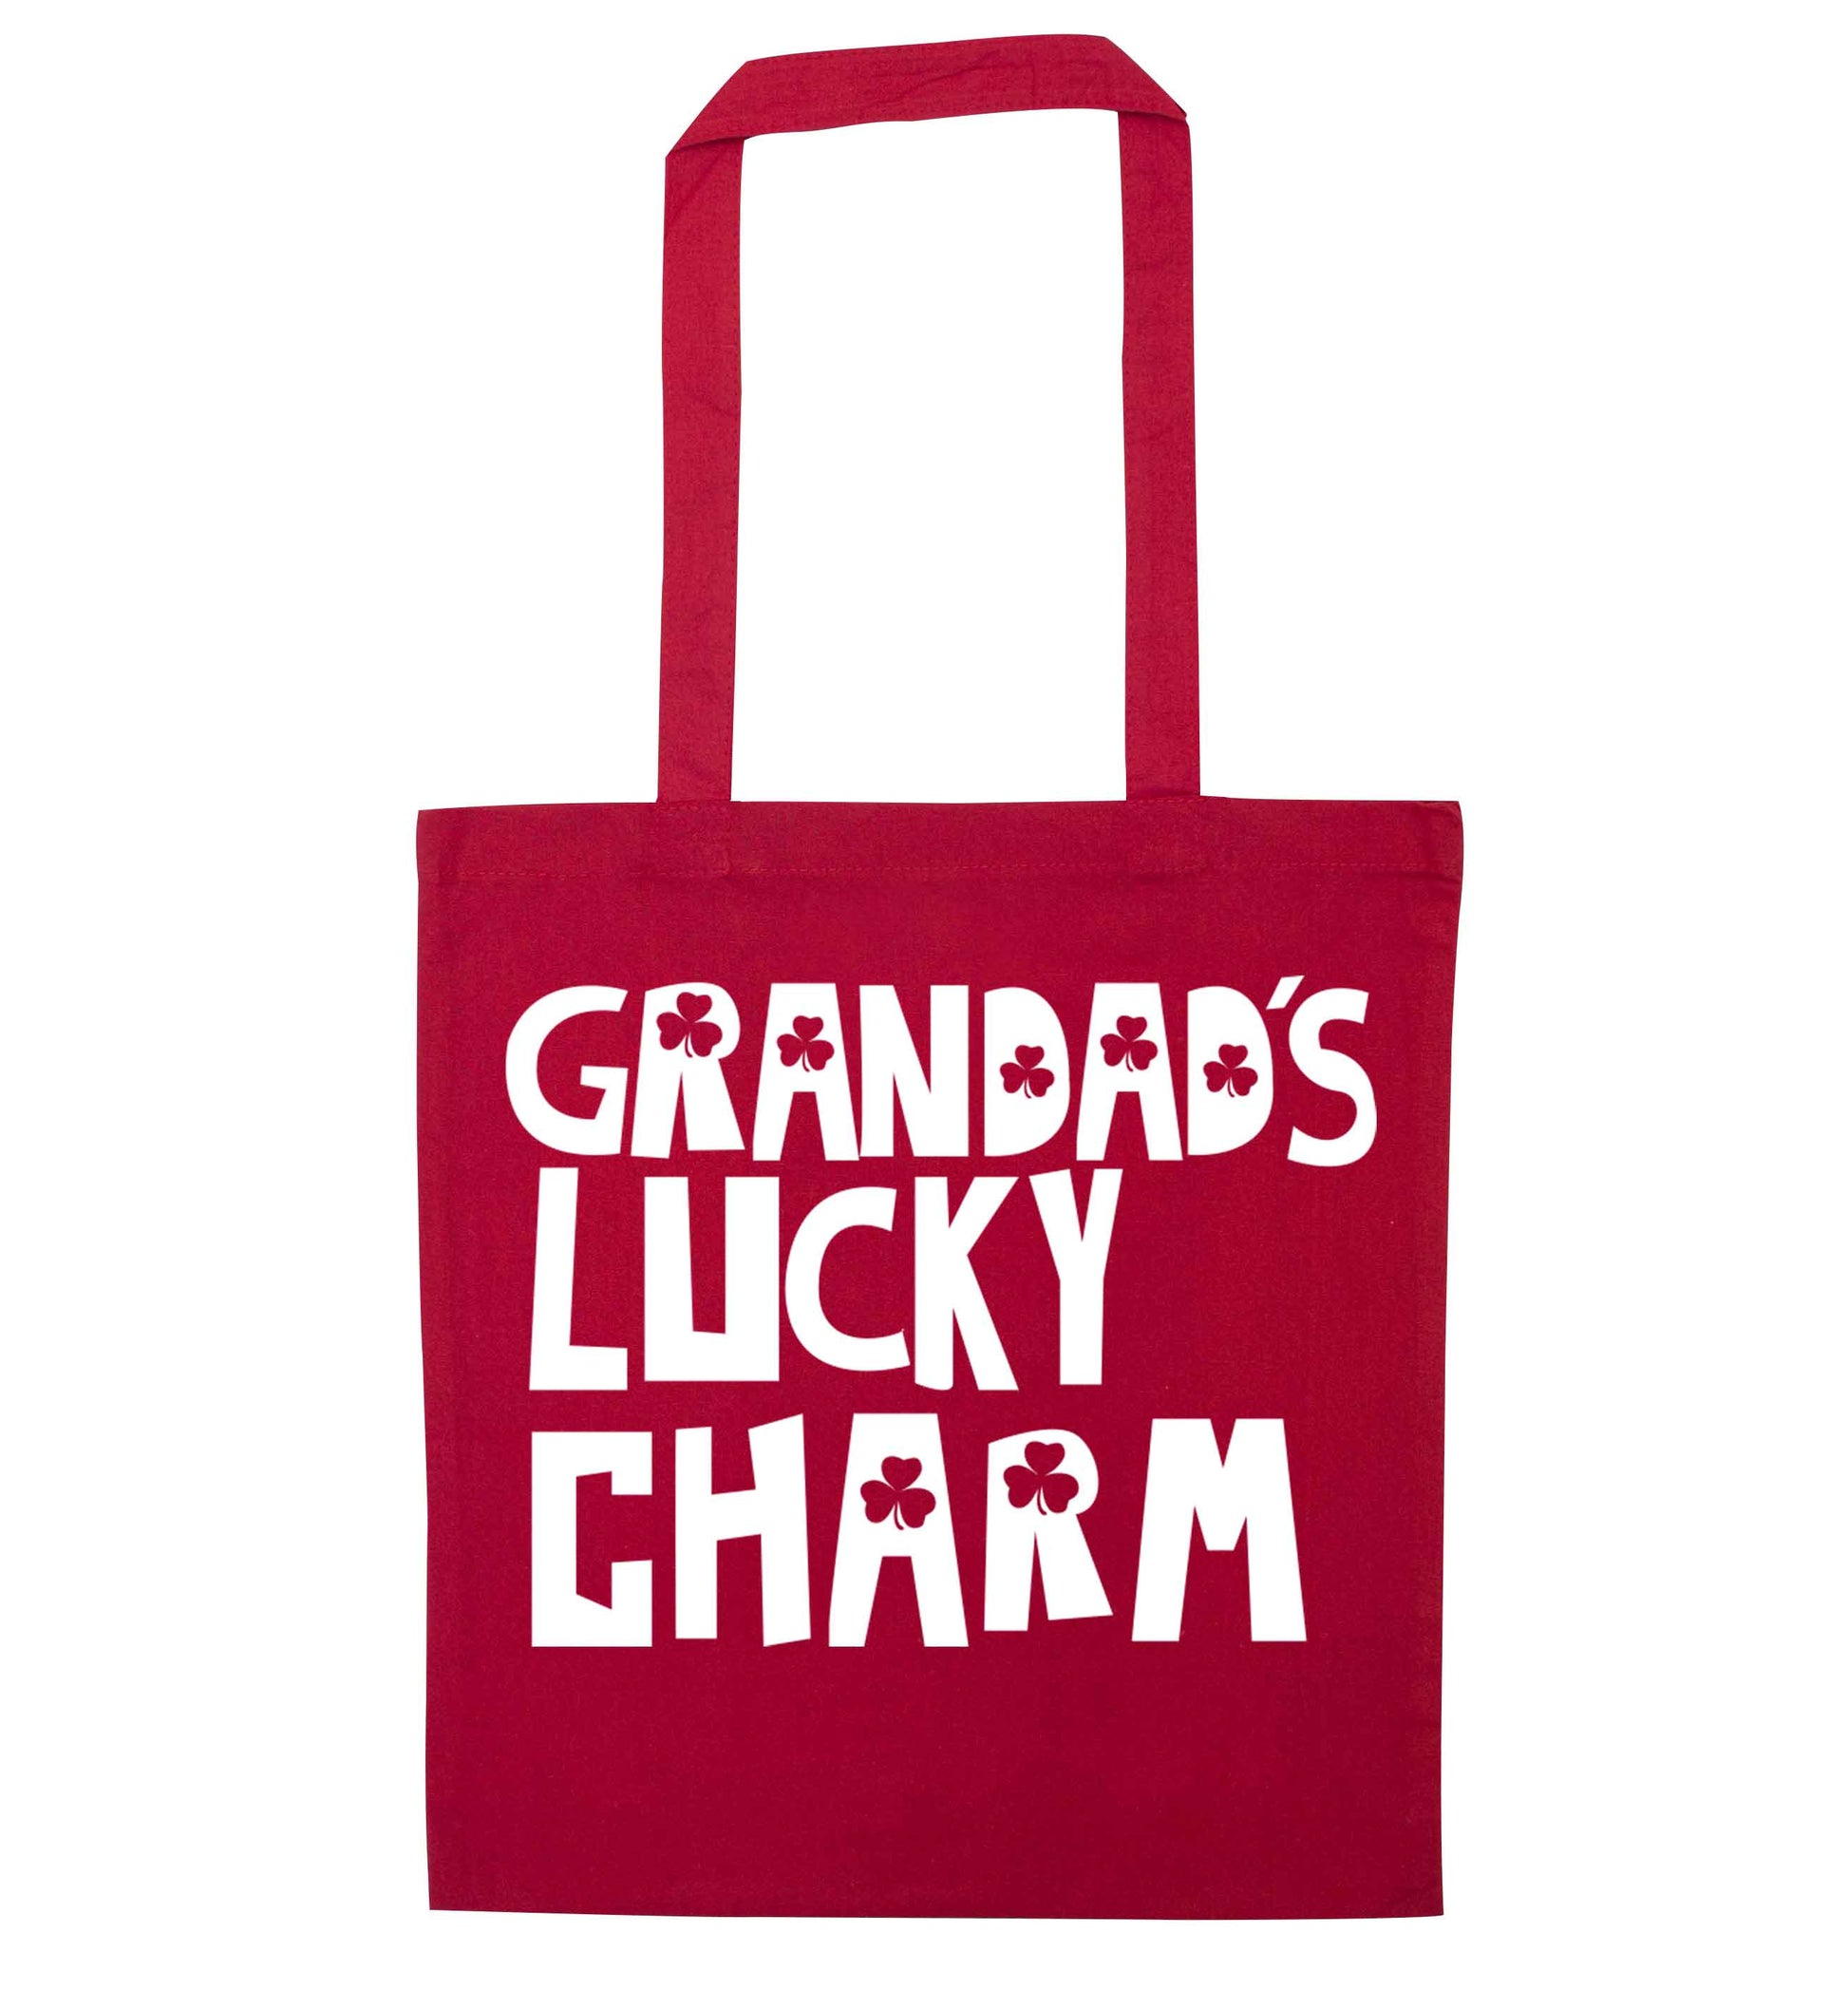 Grandad's lucky charm  red tote bag